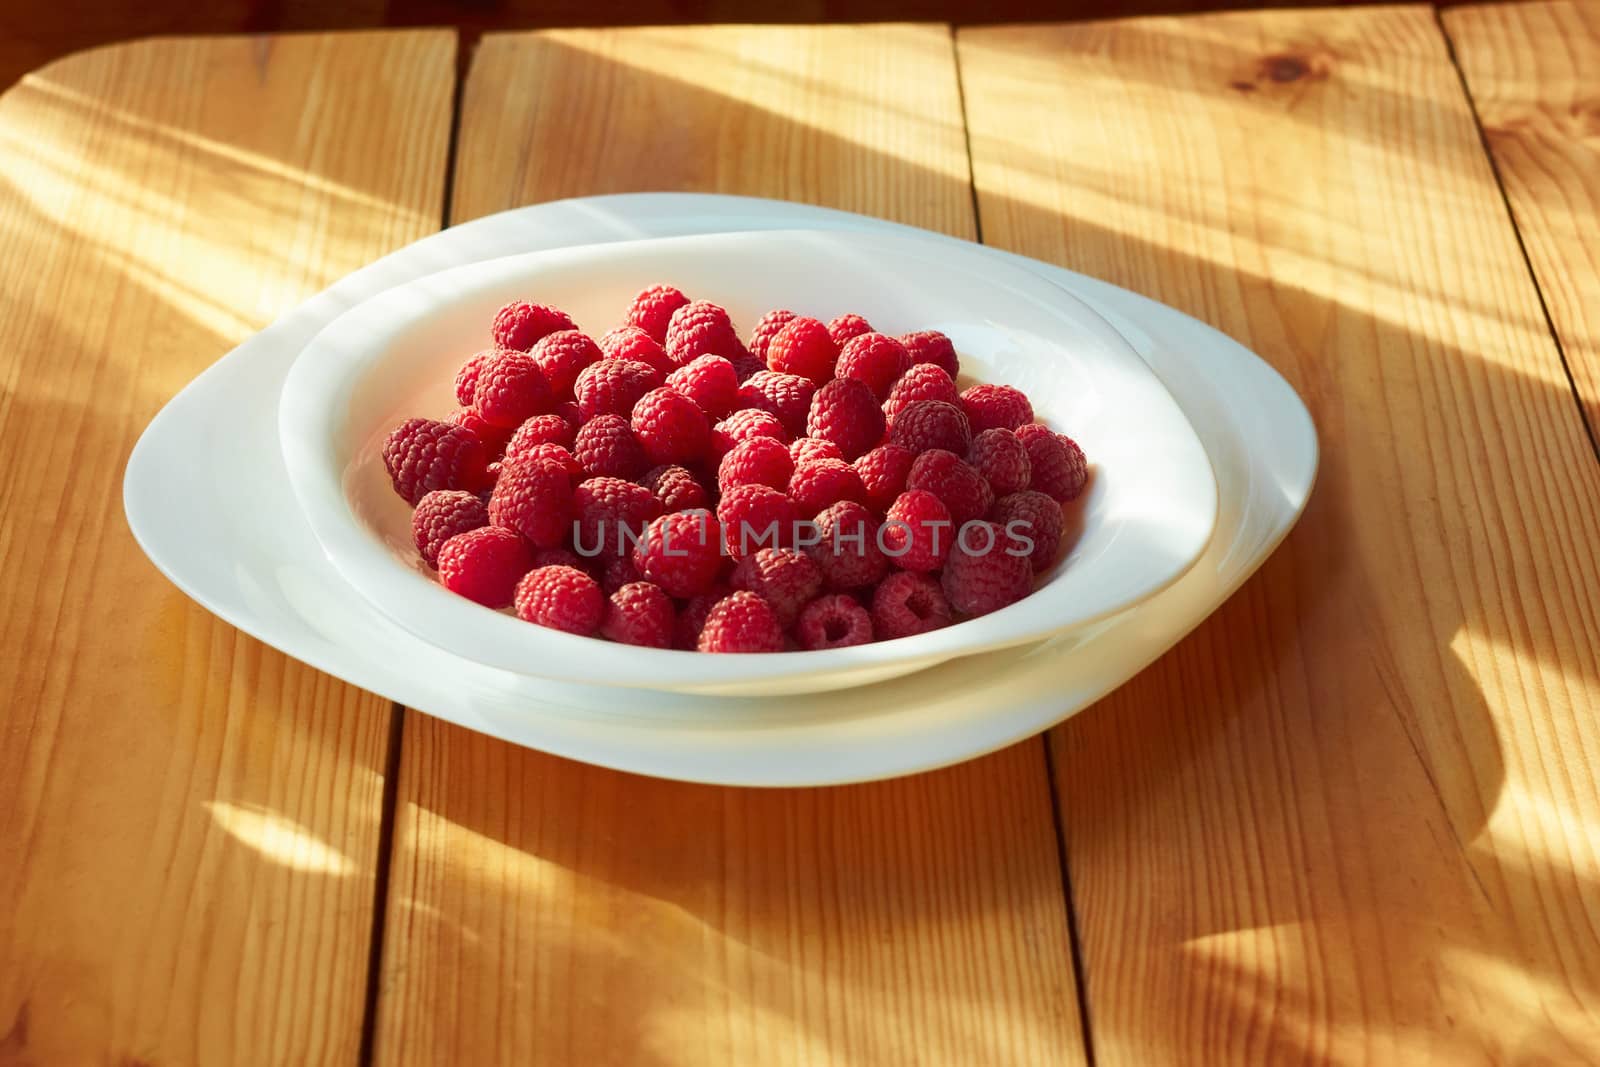 Ripe red raspberries in a plate on the wooden table partially lighted by sunlight